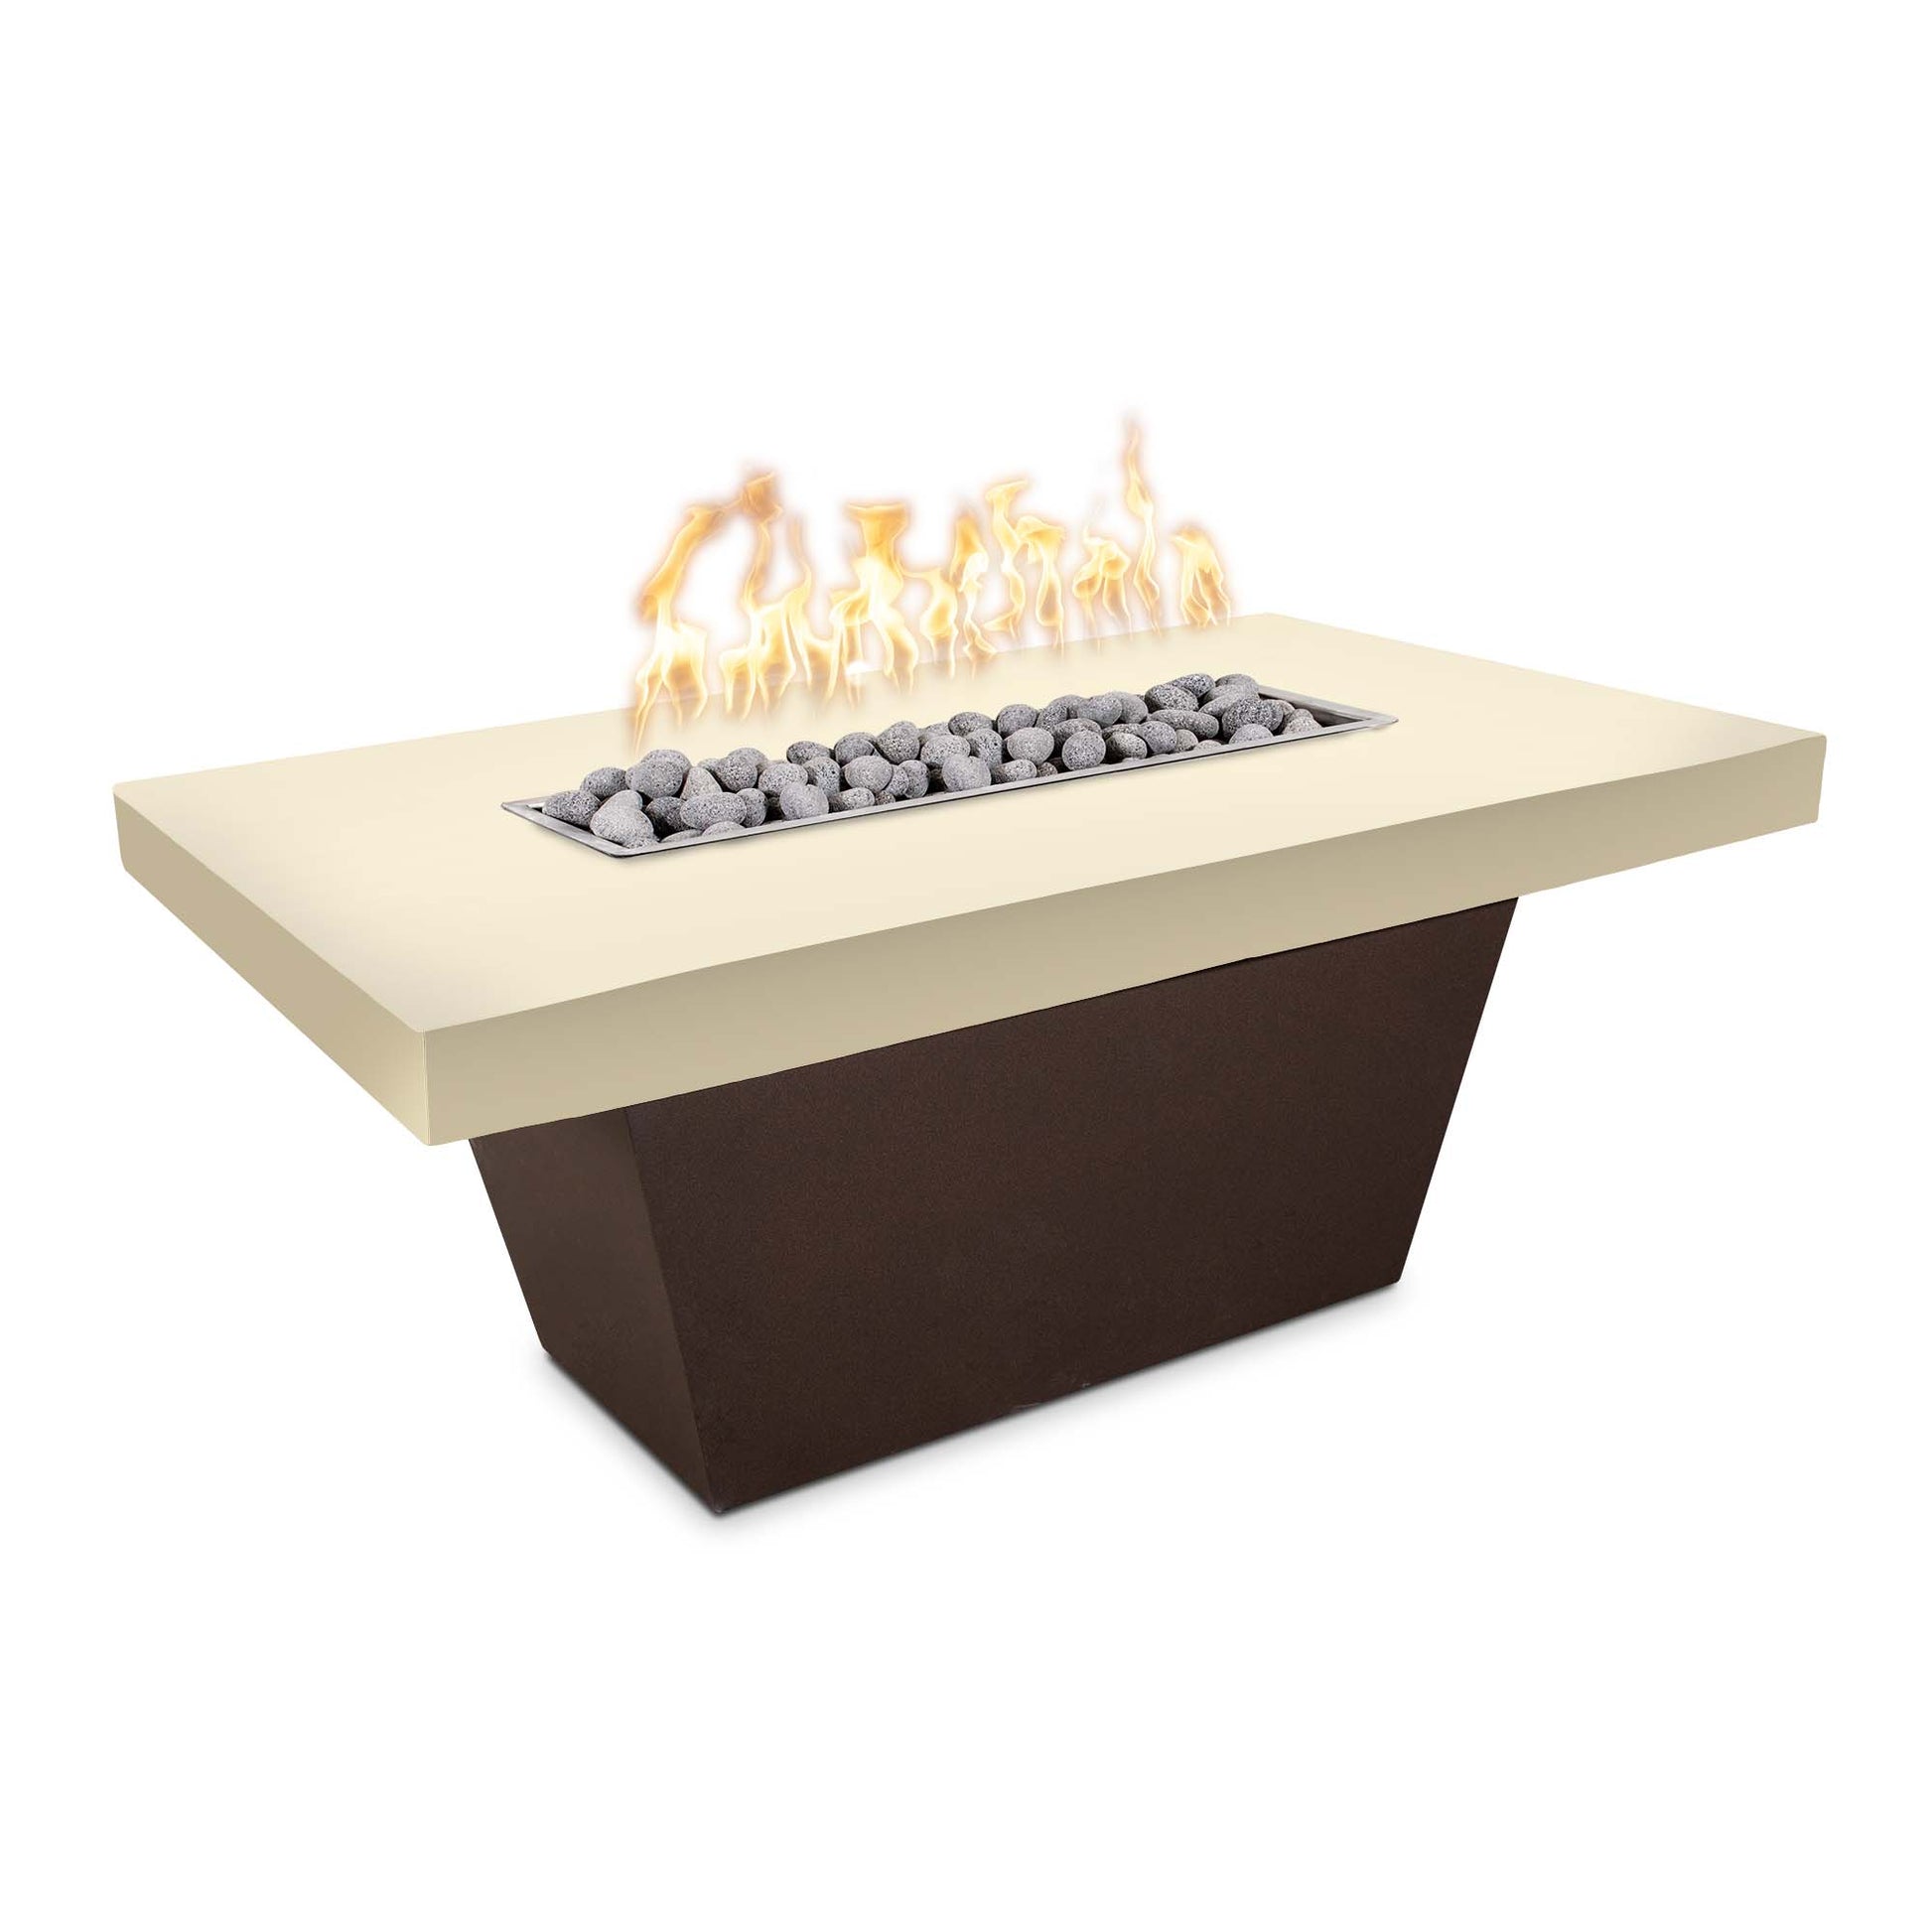 The Outdoor Plus Tacoma 48" Brown Concrete Top & Gray Powder Coated Base Natural Gas Fire Table with Match Lit Ignition